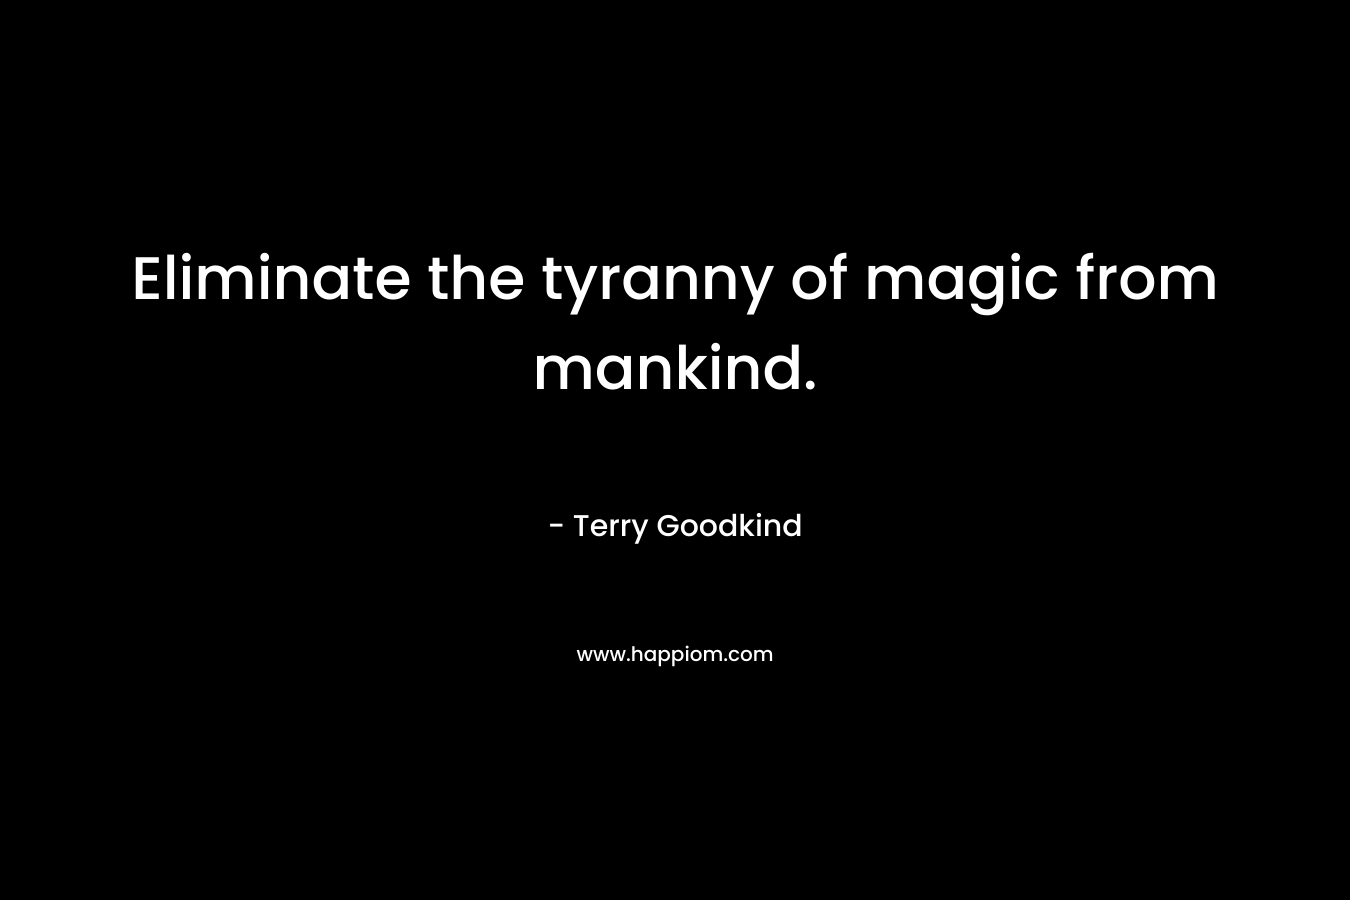 Eliminate the tyranny of magic from mankind.